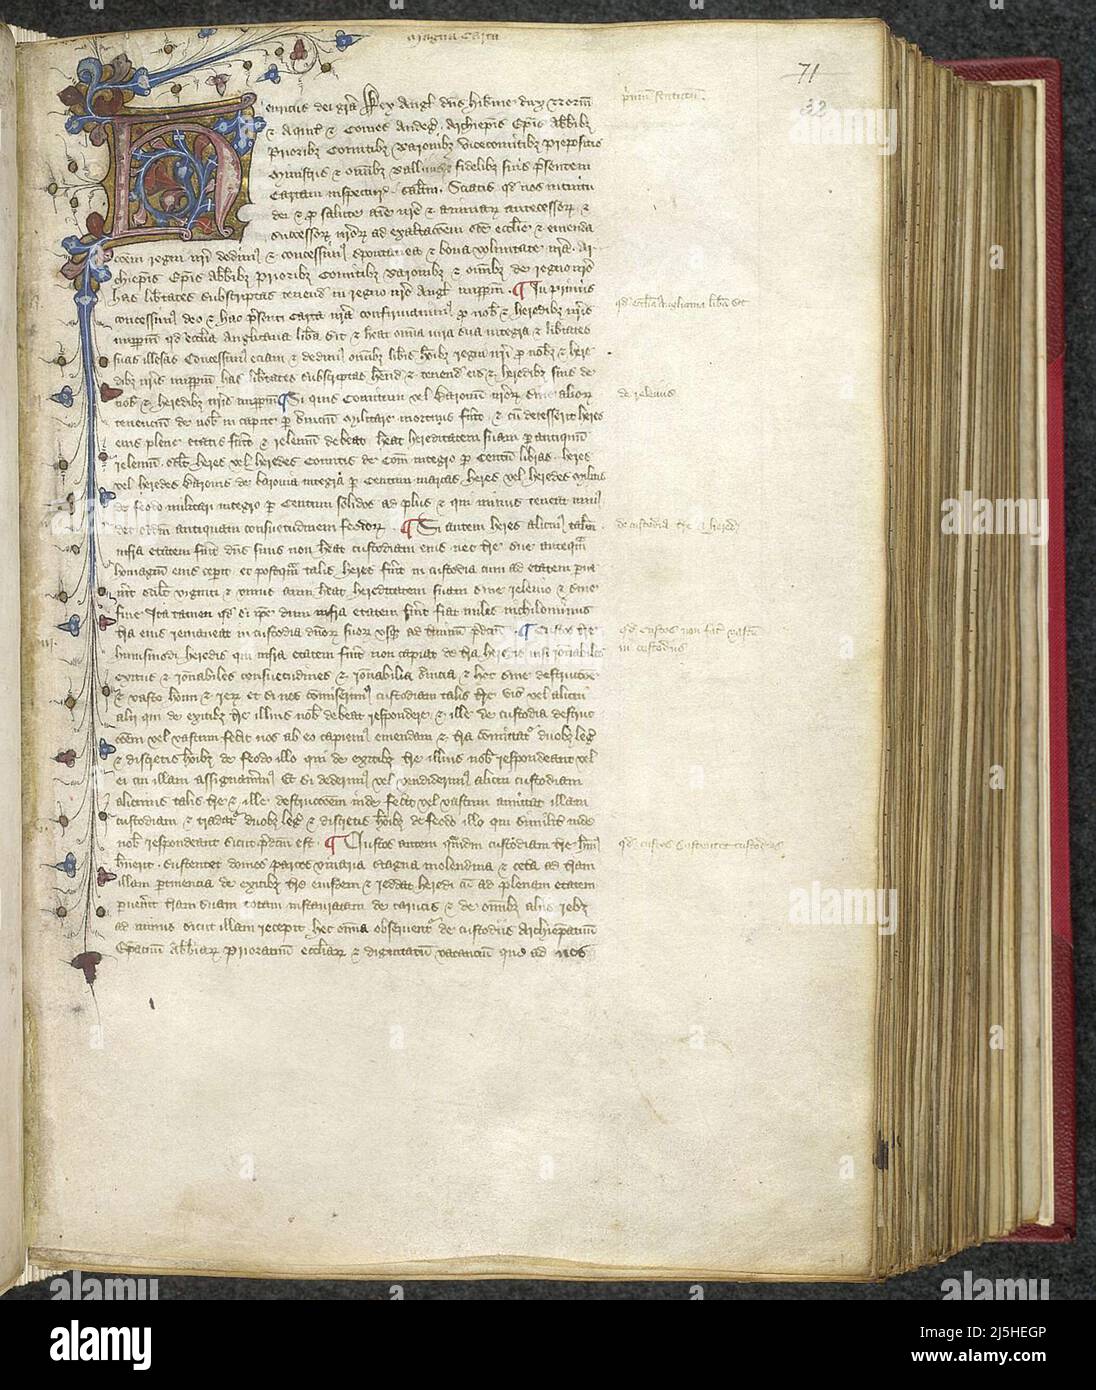 A version of the Charter of 1217, produced between 1437 and c. 1450, in the reign of Henry III copied into a book rather than a scroll like earlier versions Stock Photo